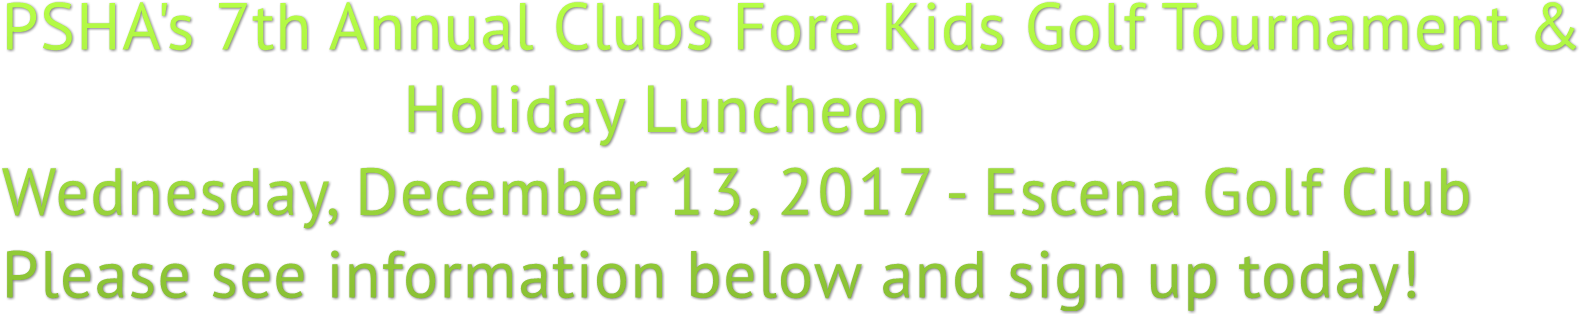 PSHA&#39;s 7th Annual Clubs Fore Kids Golf Tournament &amp; Holiday Luncheon Wednesday, December 13, 2017 - Escena Golf Club Please see information below and sign up today!